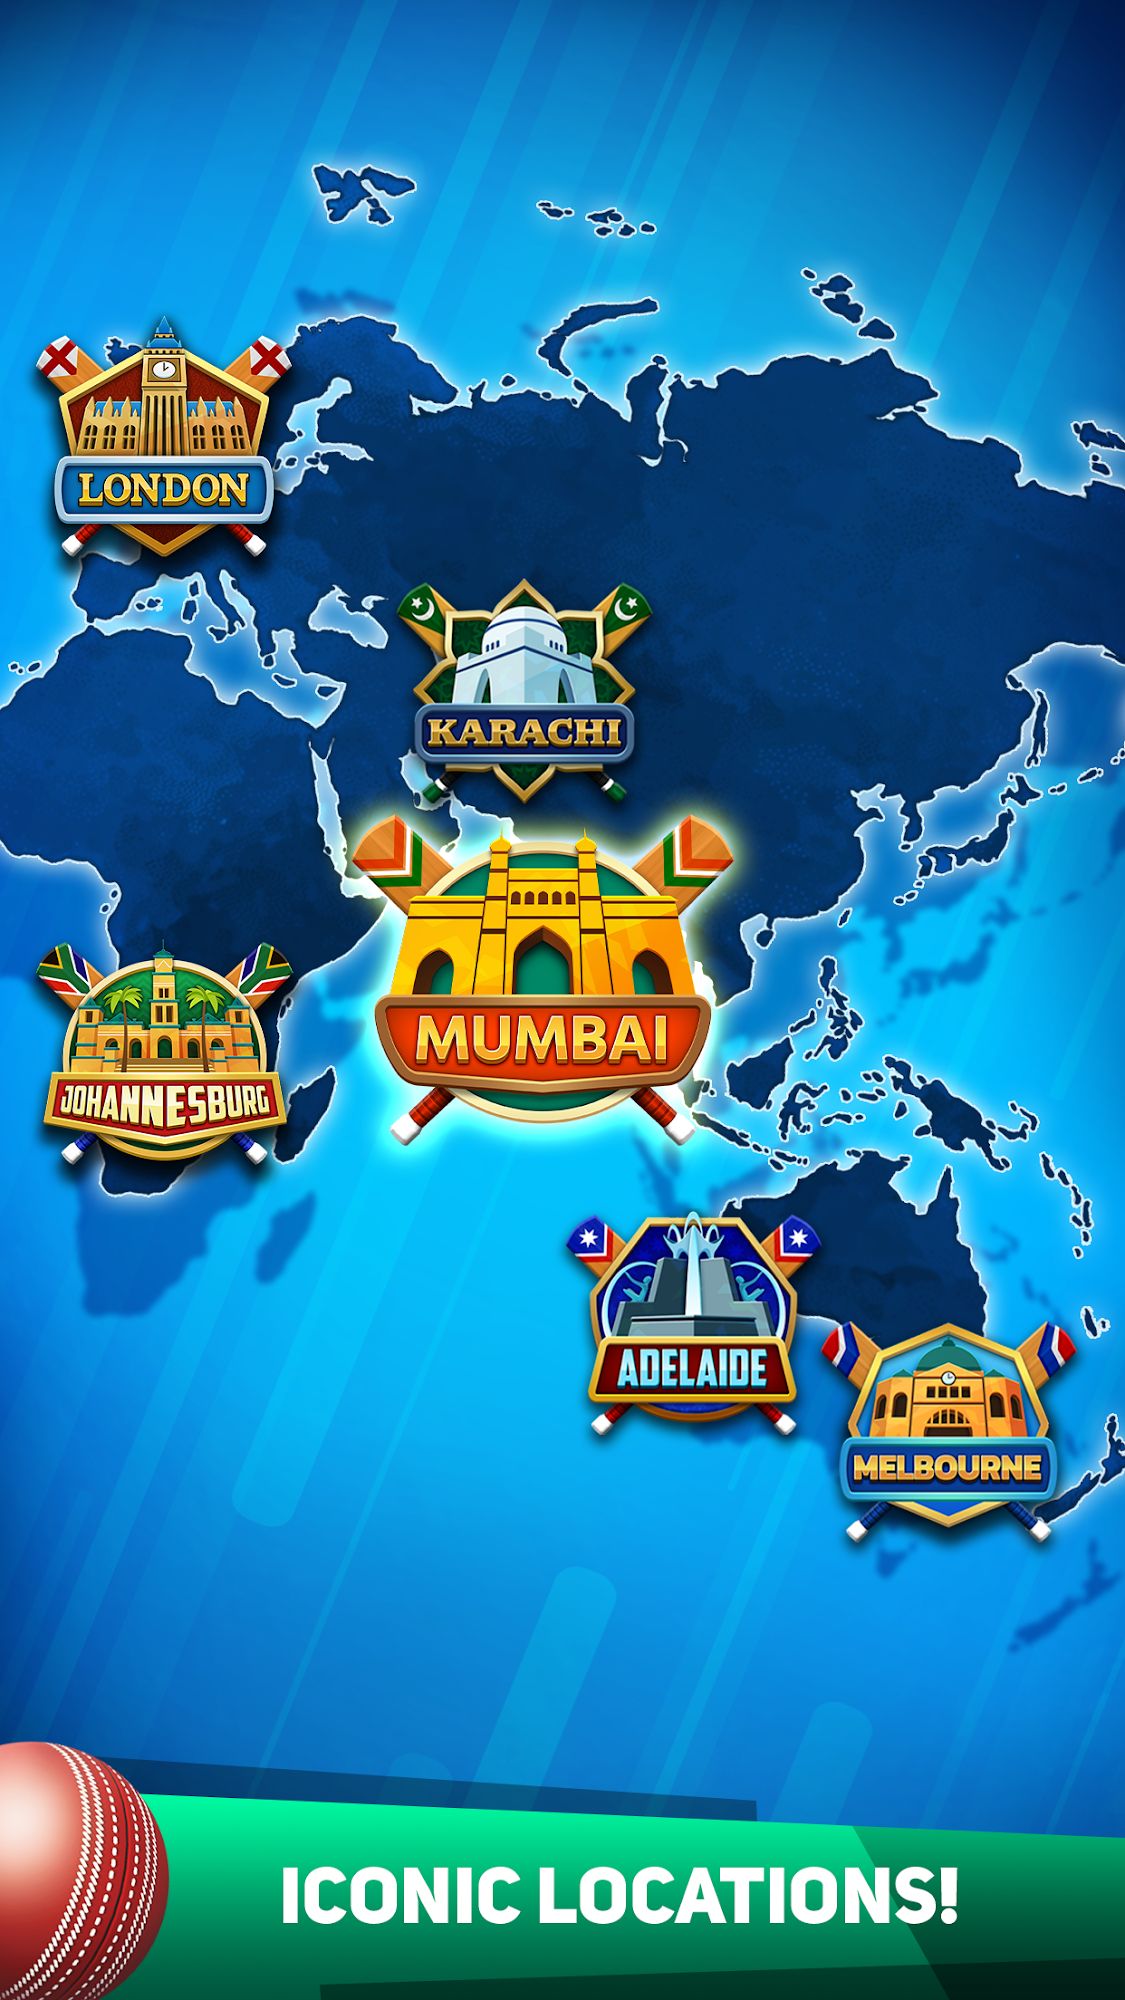 Cricket League - Android game screenshots.